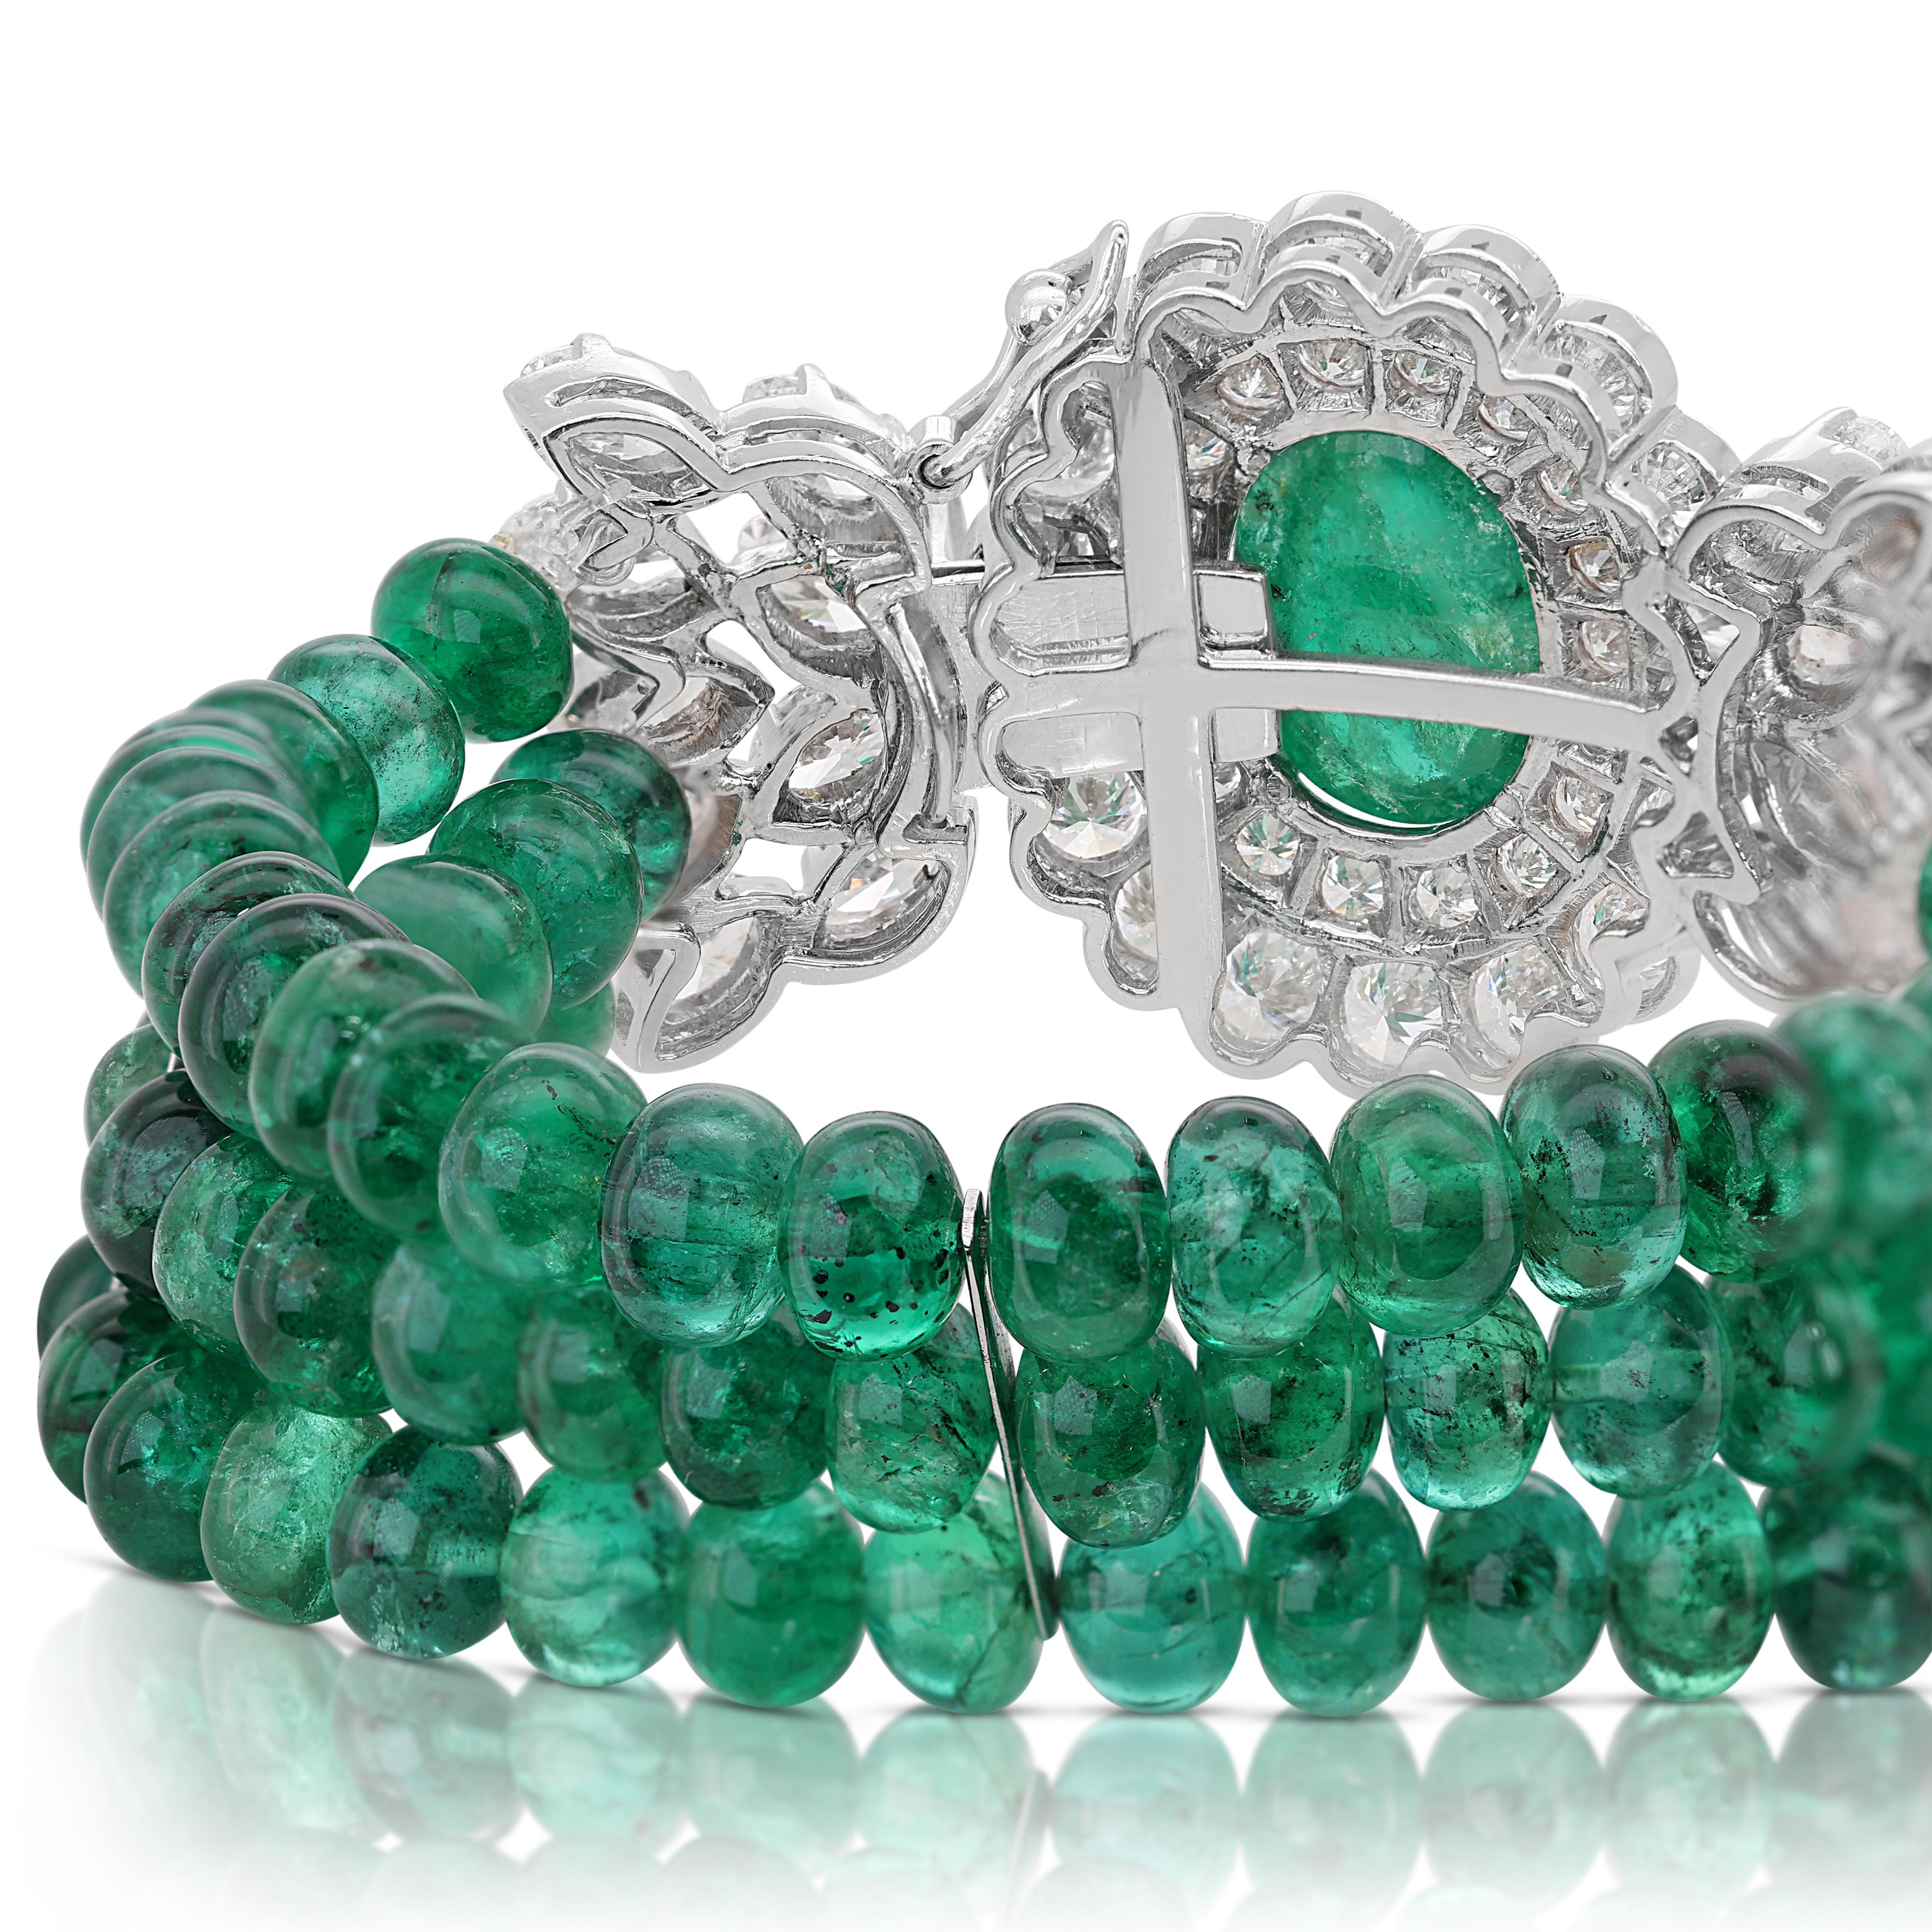 Stunning 4.76ct Emerald Bracelet with Diamonds in 18K White Gold  For Sale 1